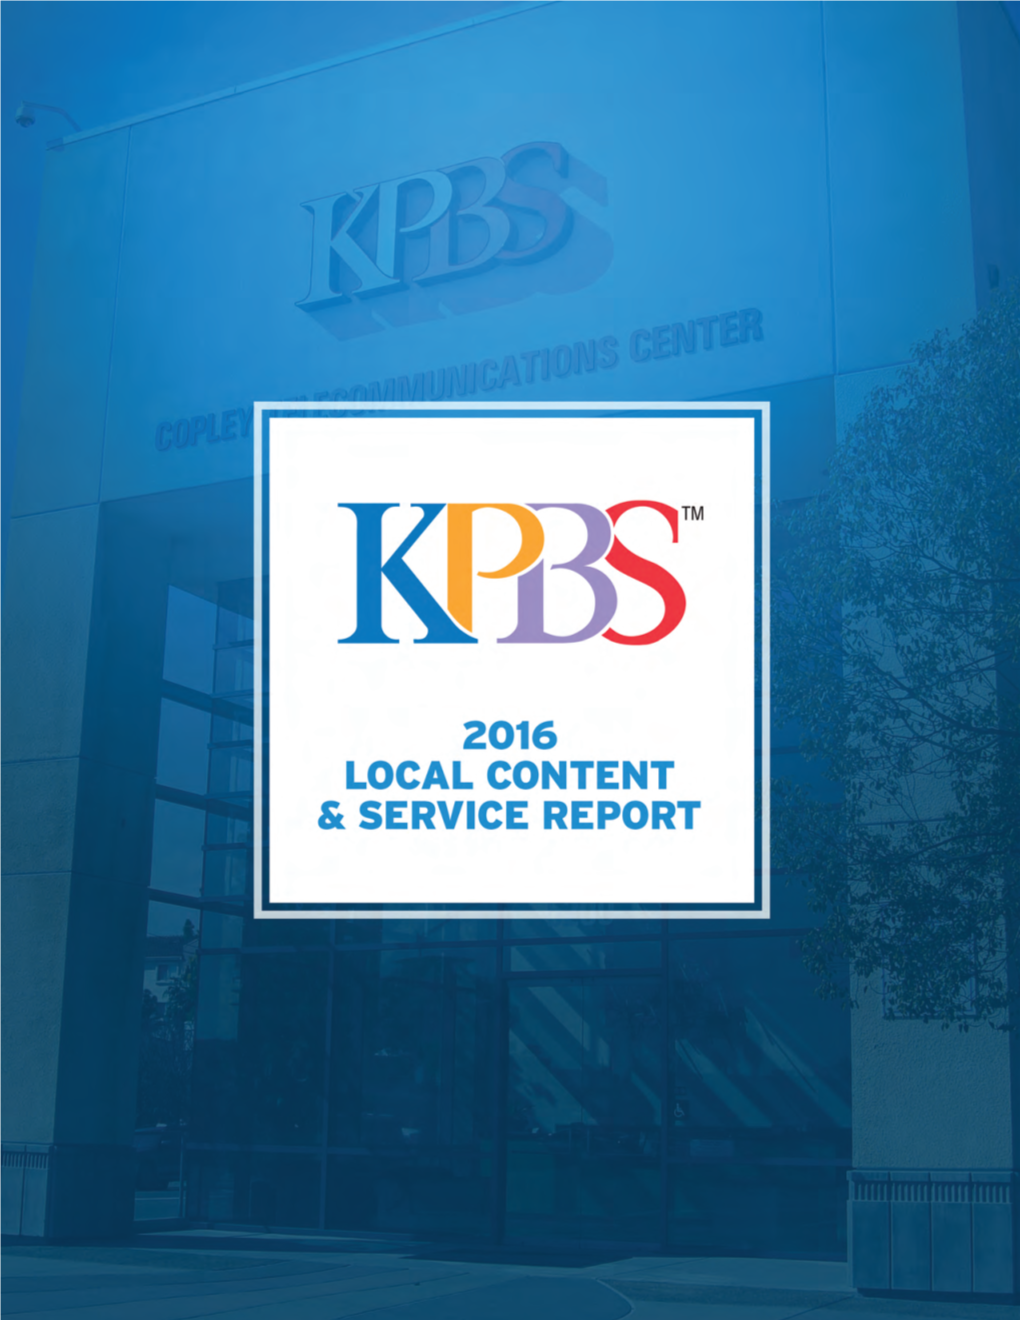 KPBS 2016 Local Content and Service Report